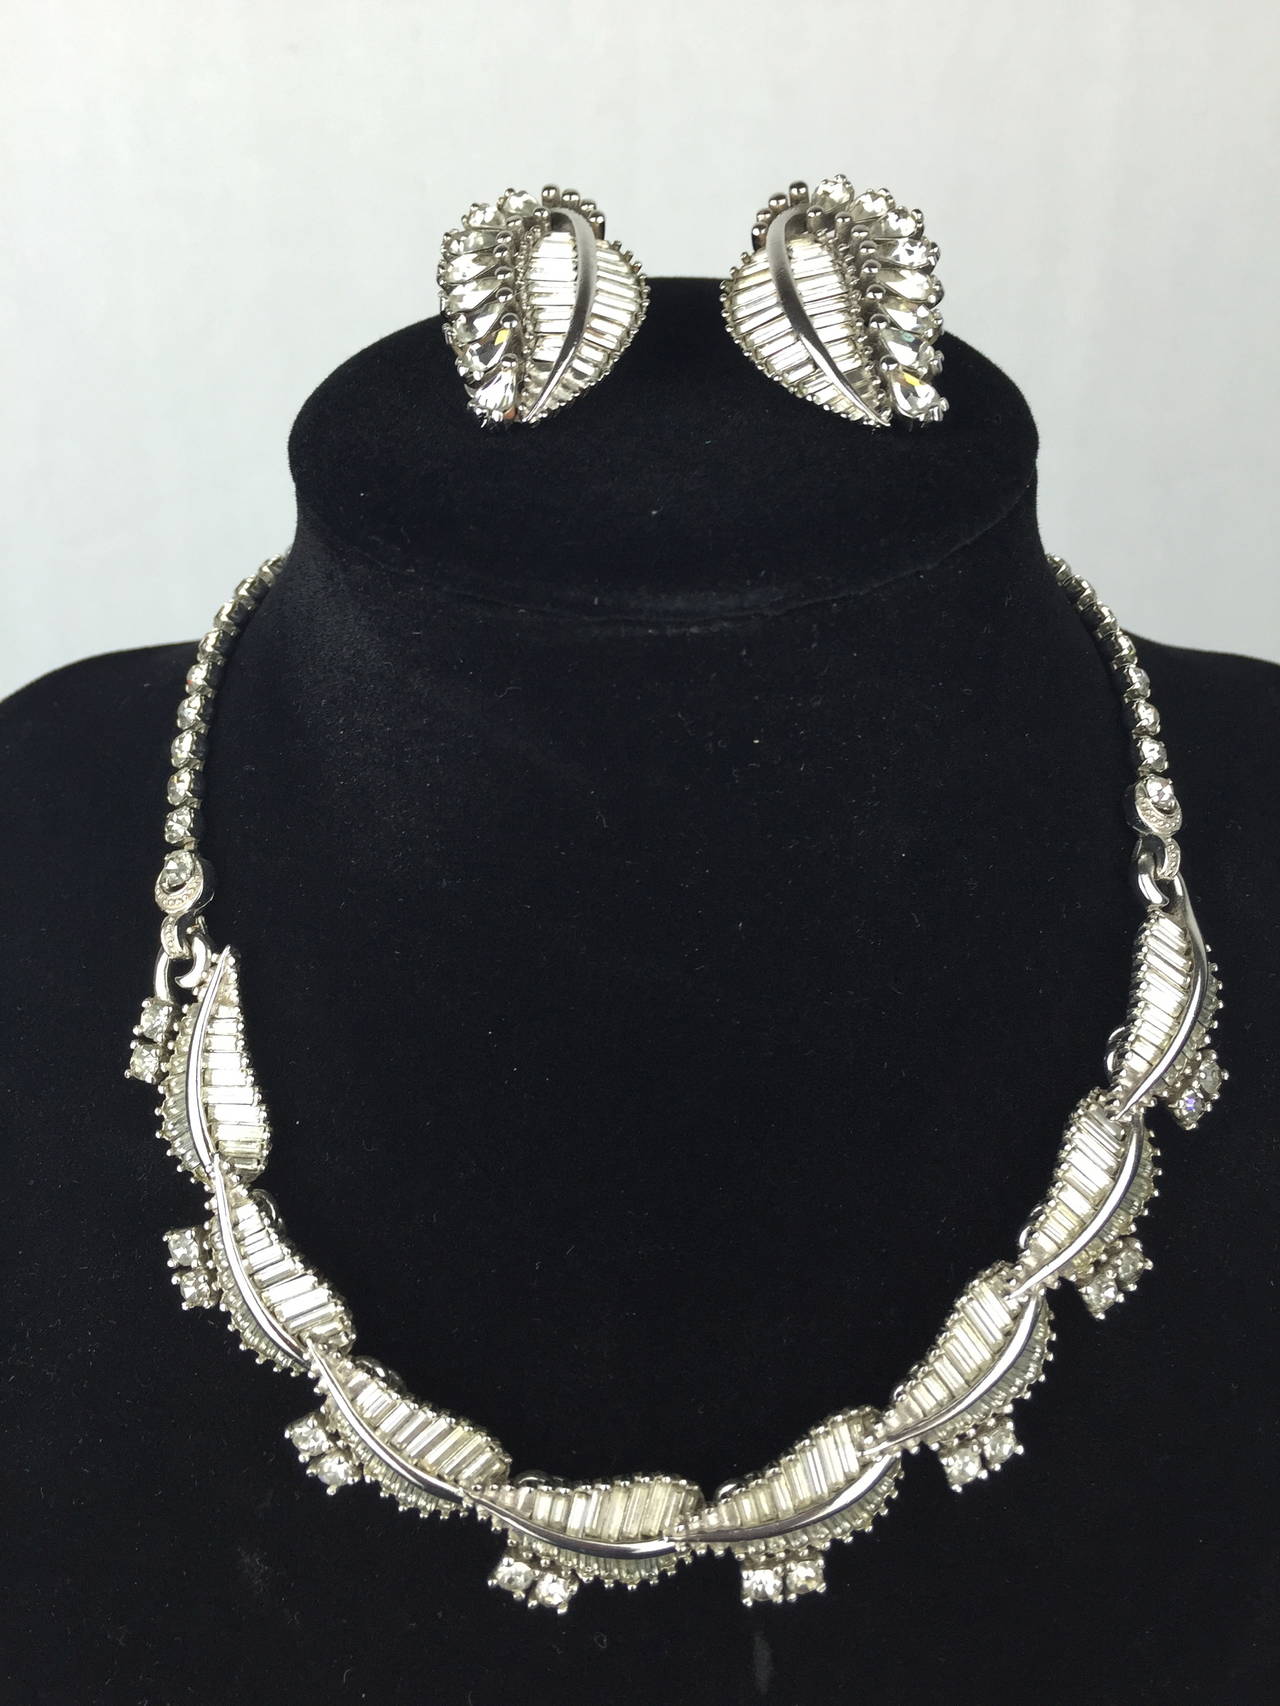 Women's Deco style 1950's Pennino necklace and earrings.